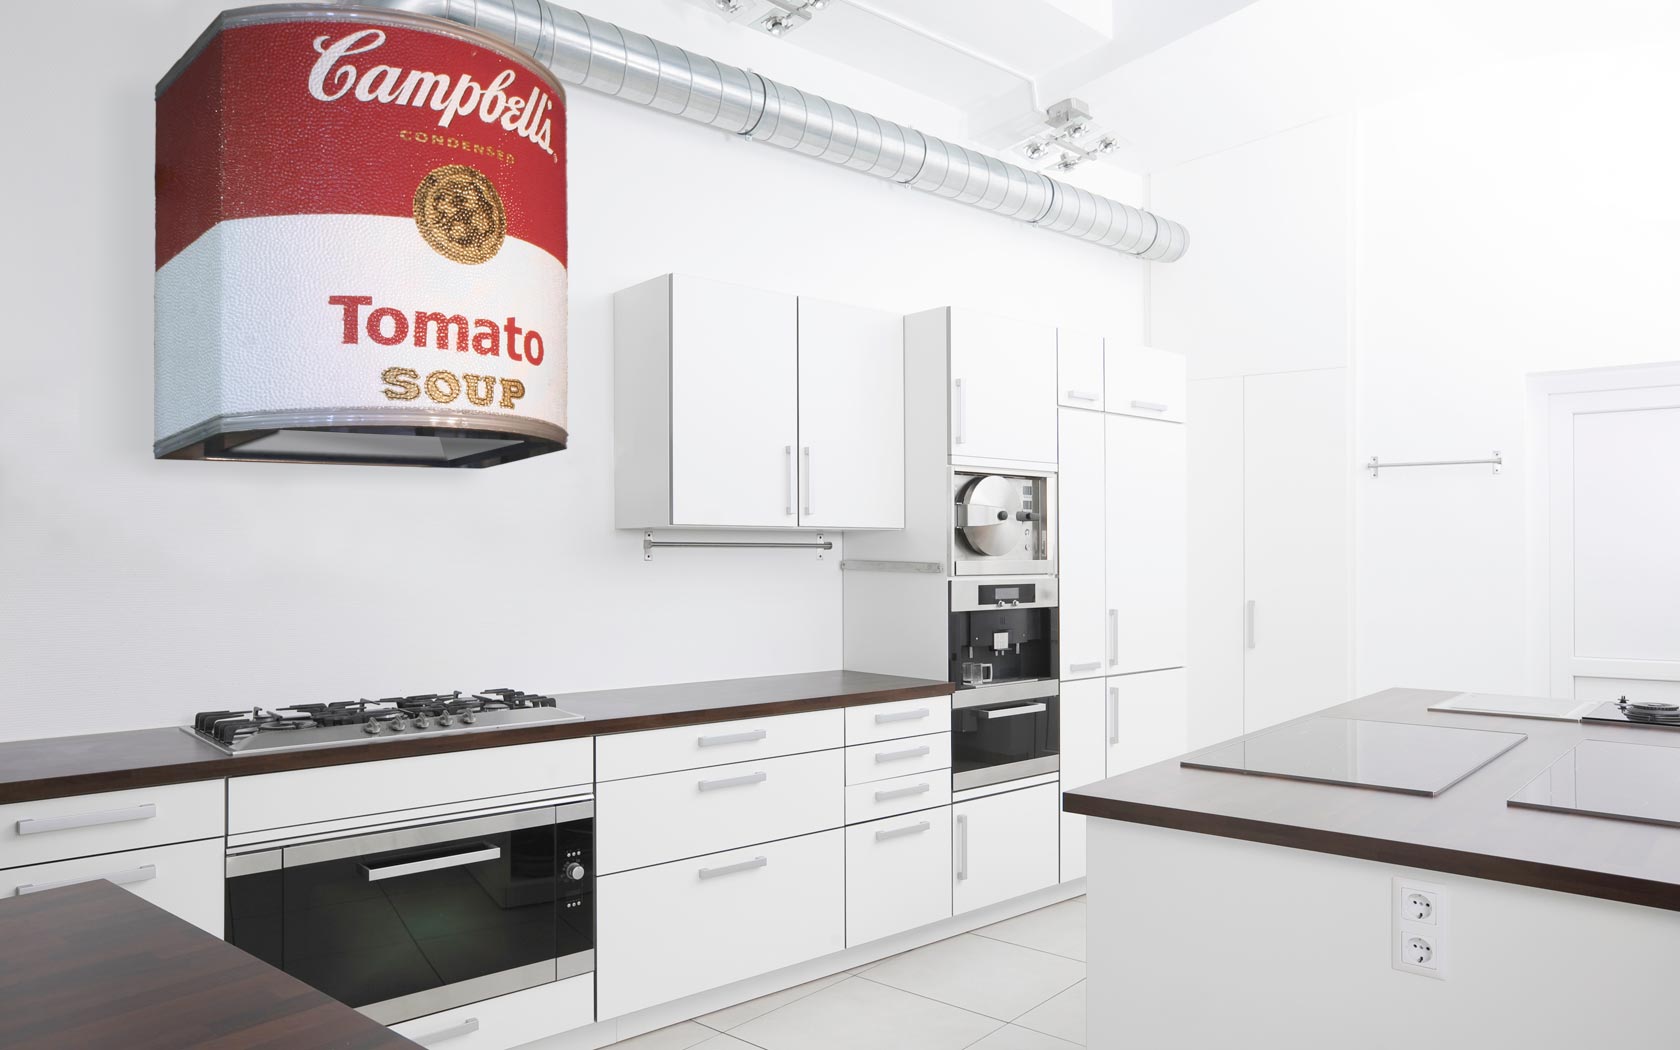 A pop art kitchen with a Campbell's tomato can hanging above the stove.